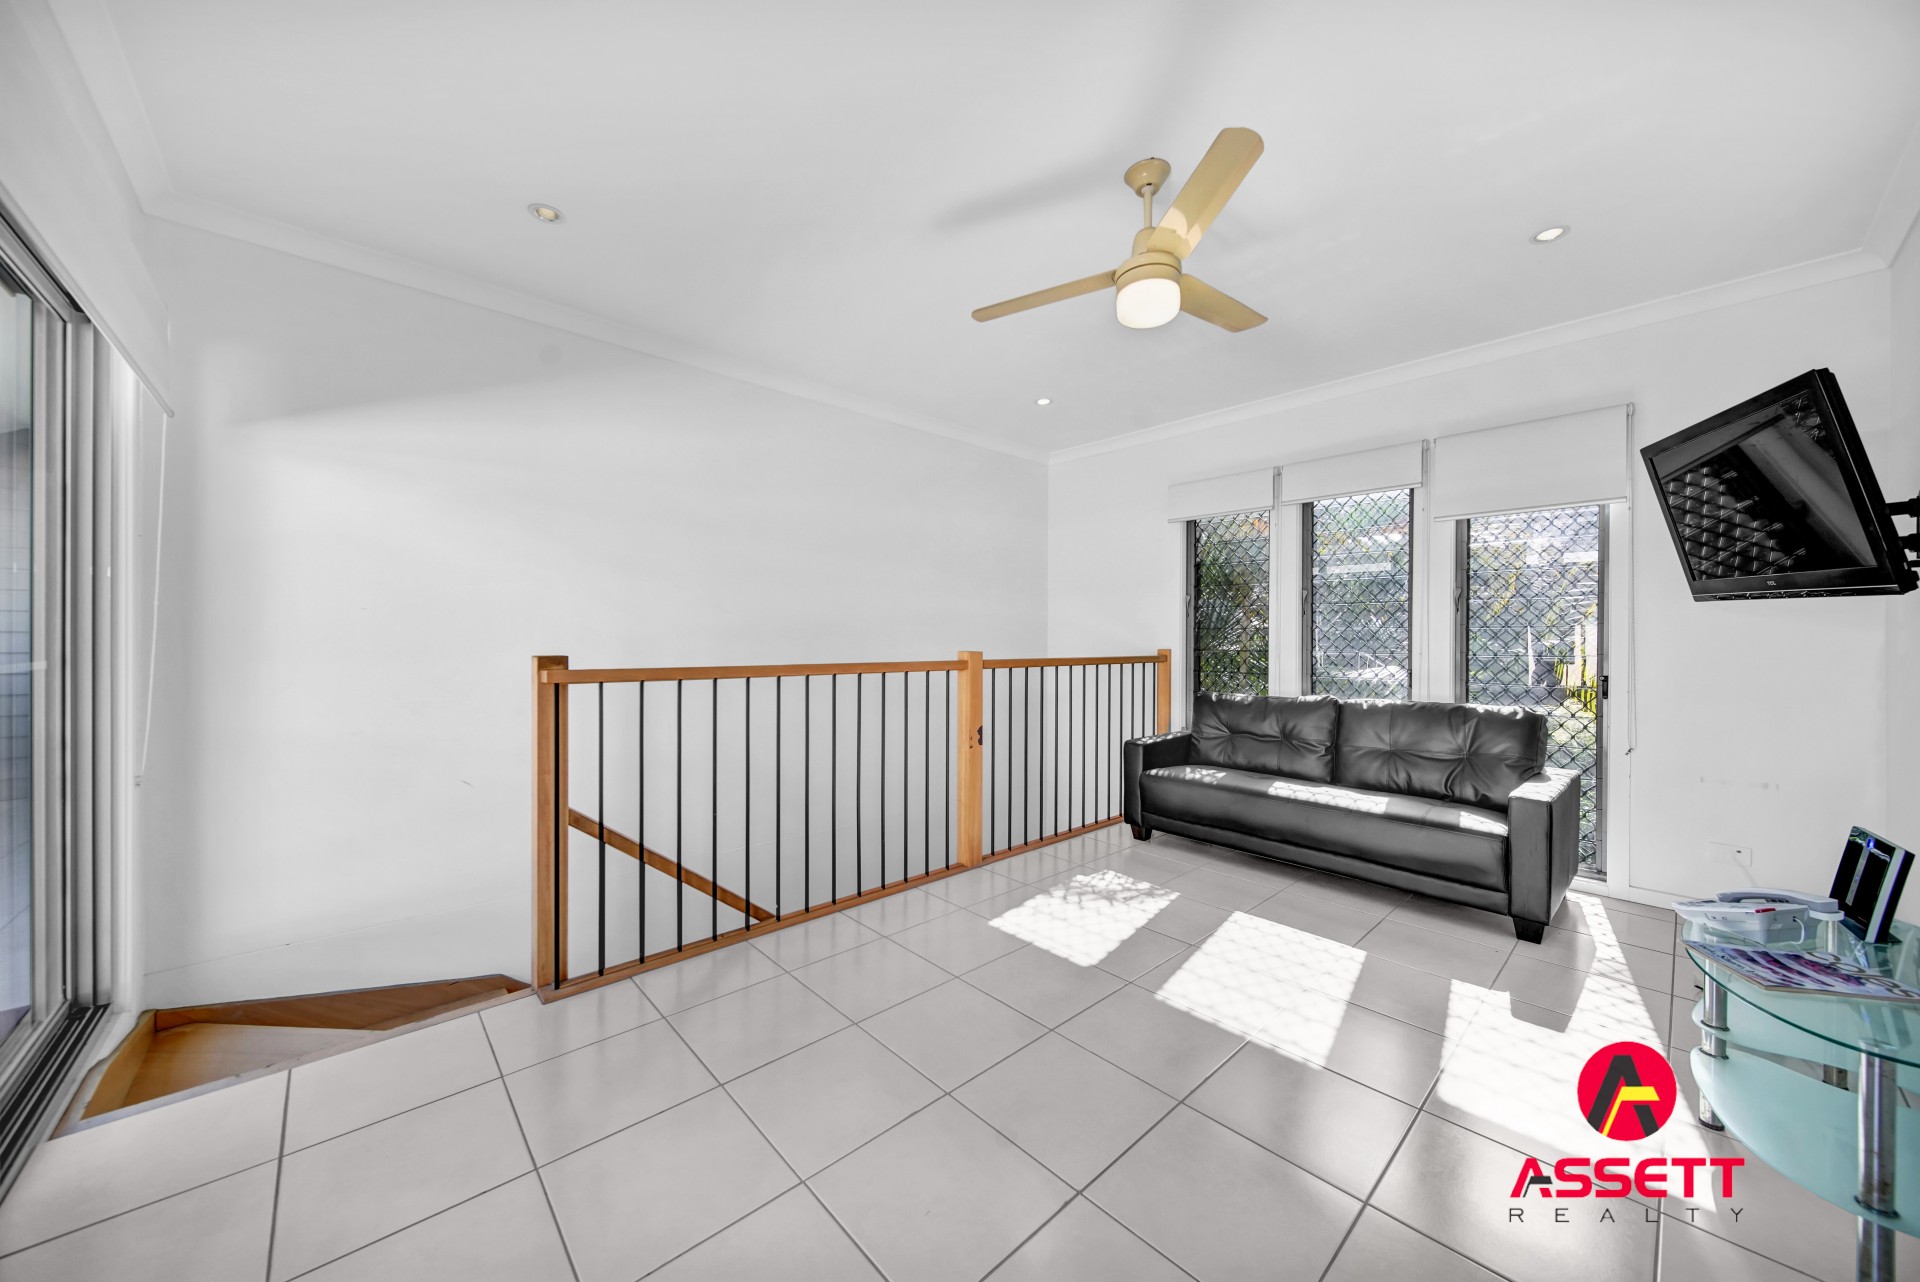 Open for inspection in Surfers Paradise